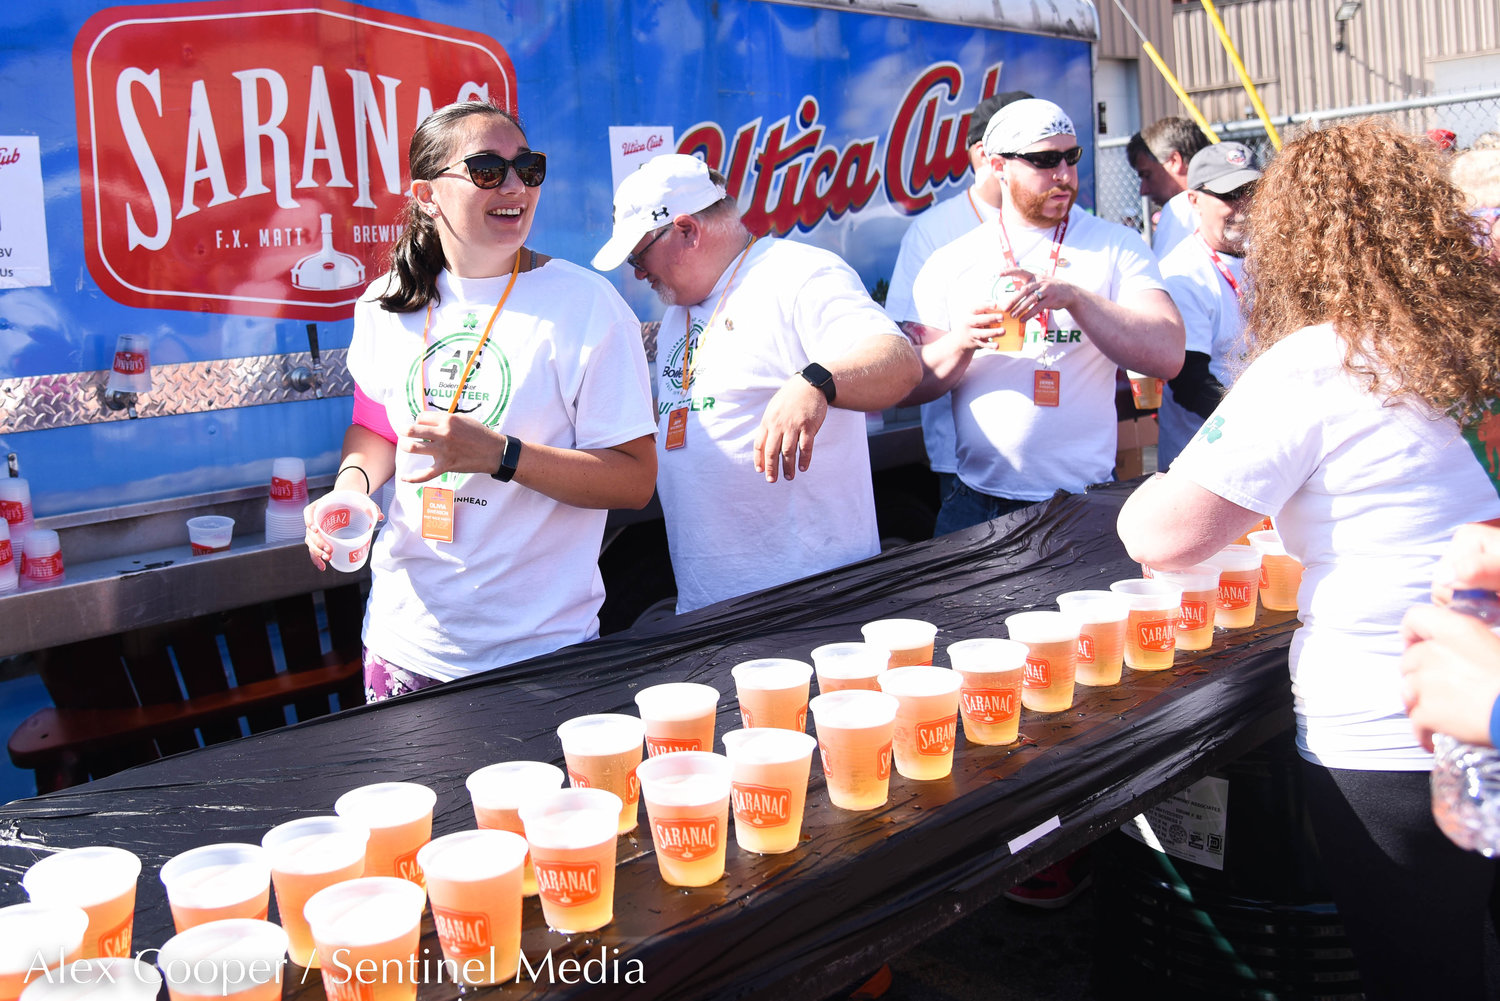 Volunteers serve cold brews at the Saranac Post Race Party following the 45th Boilermaker Road Race in Utica.